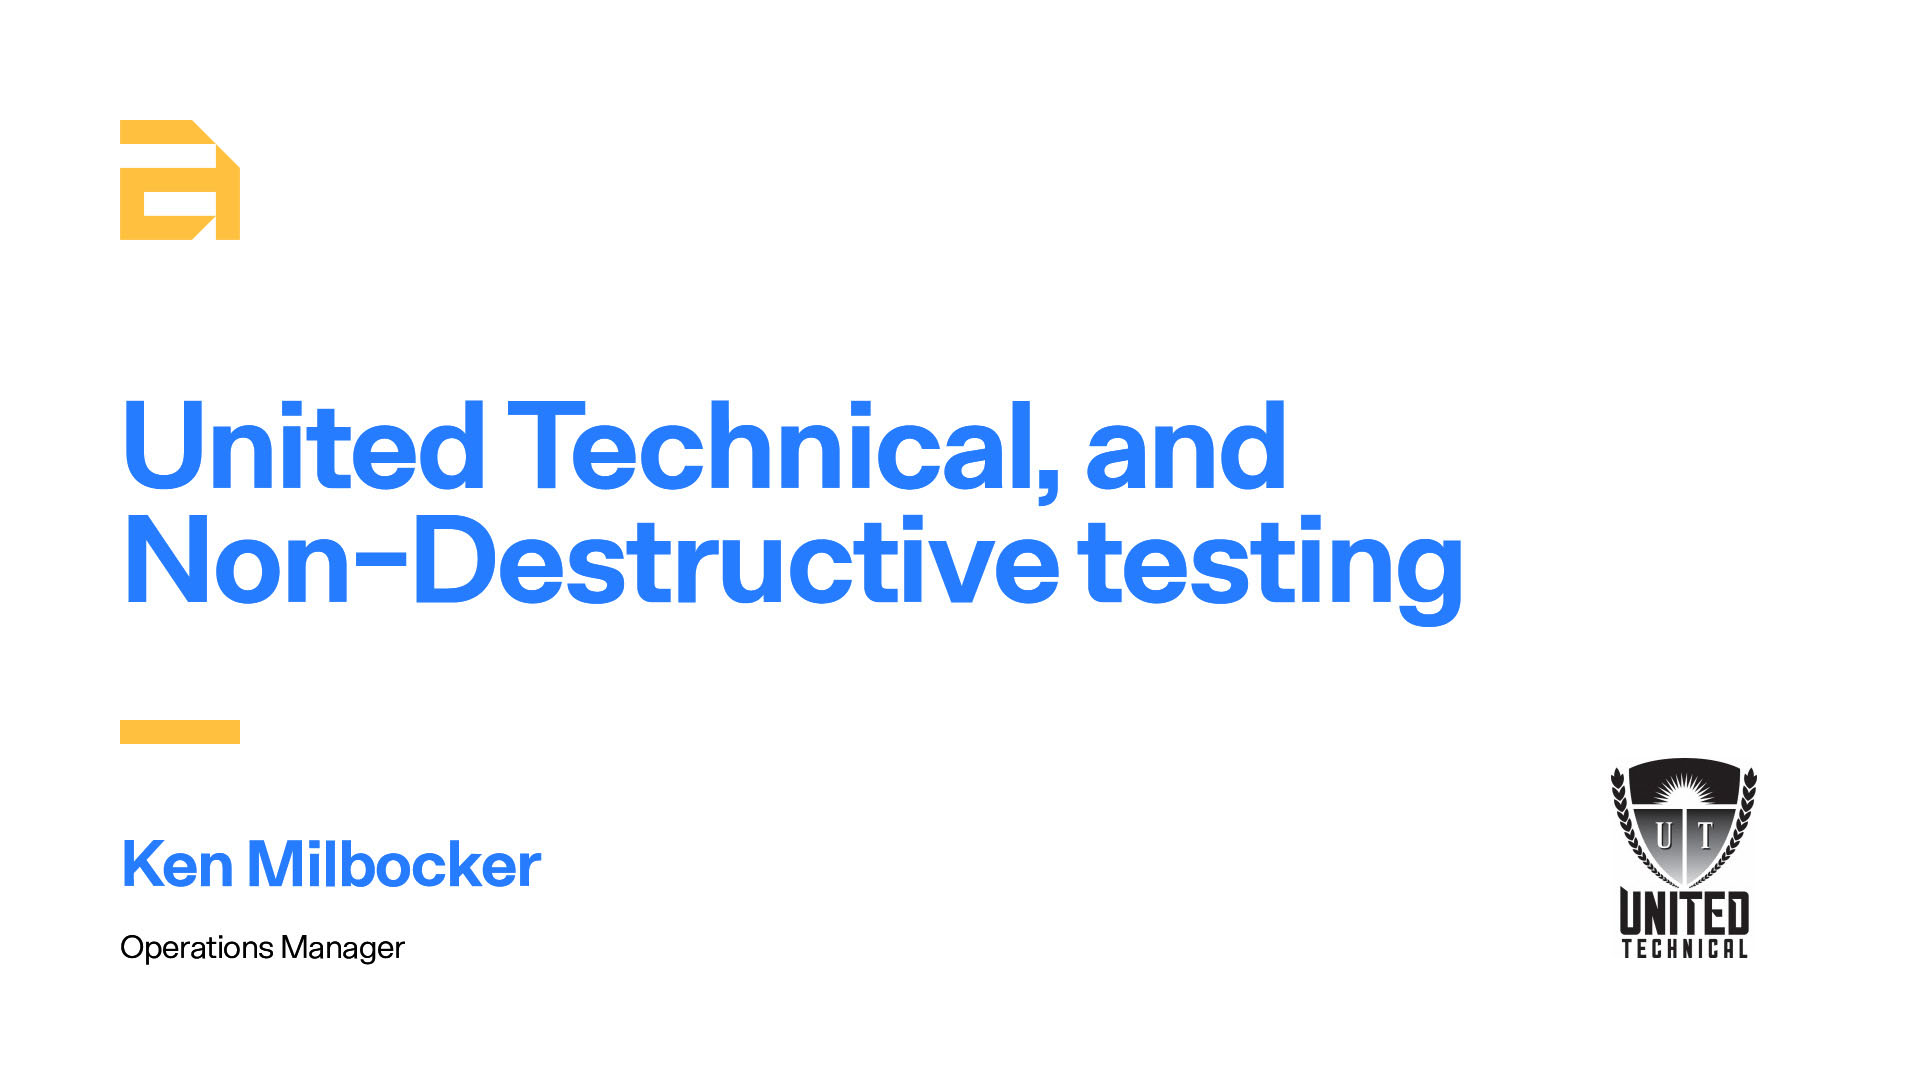 United Technical Explains How Non-destructive Testing Applies to Additive Manufacturing